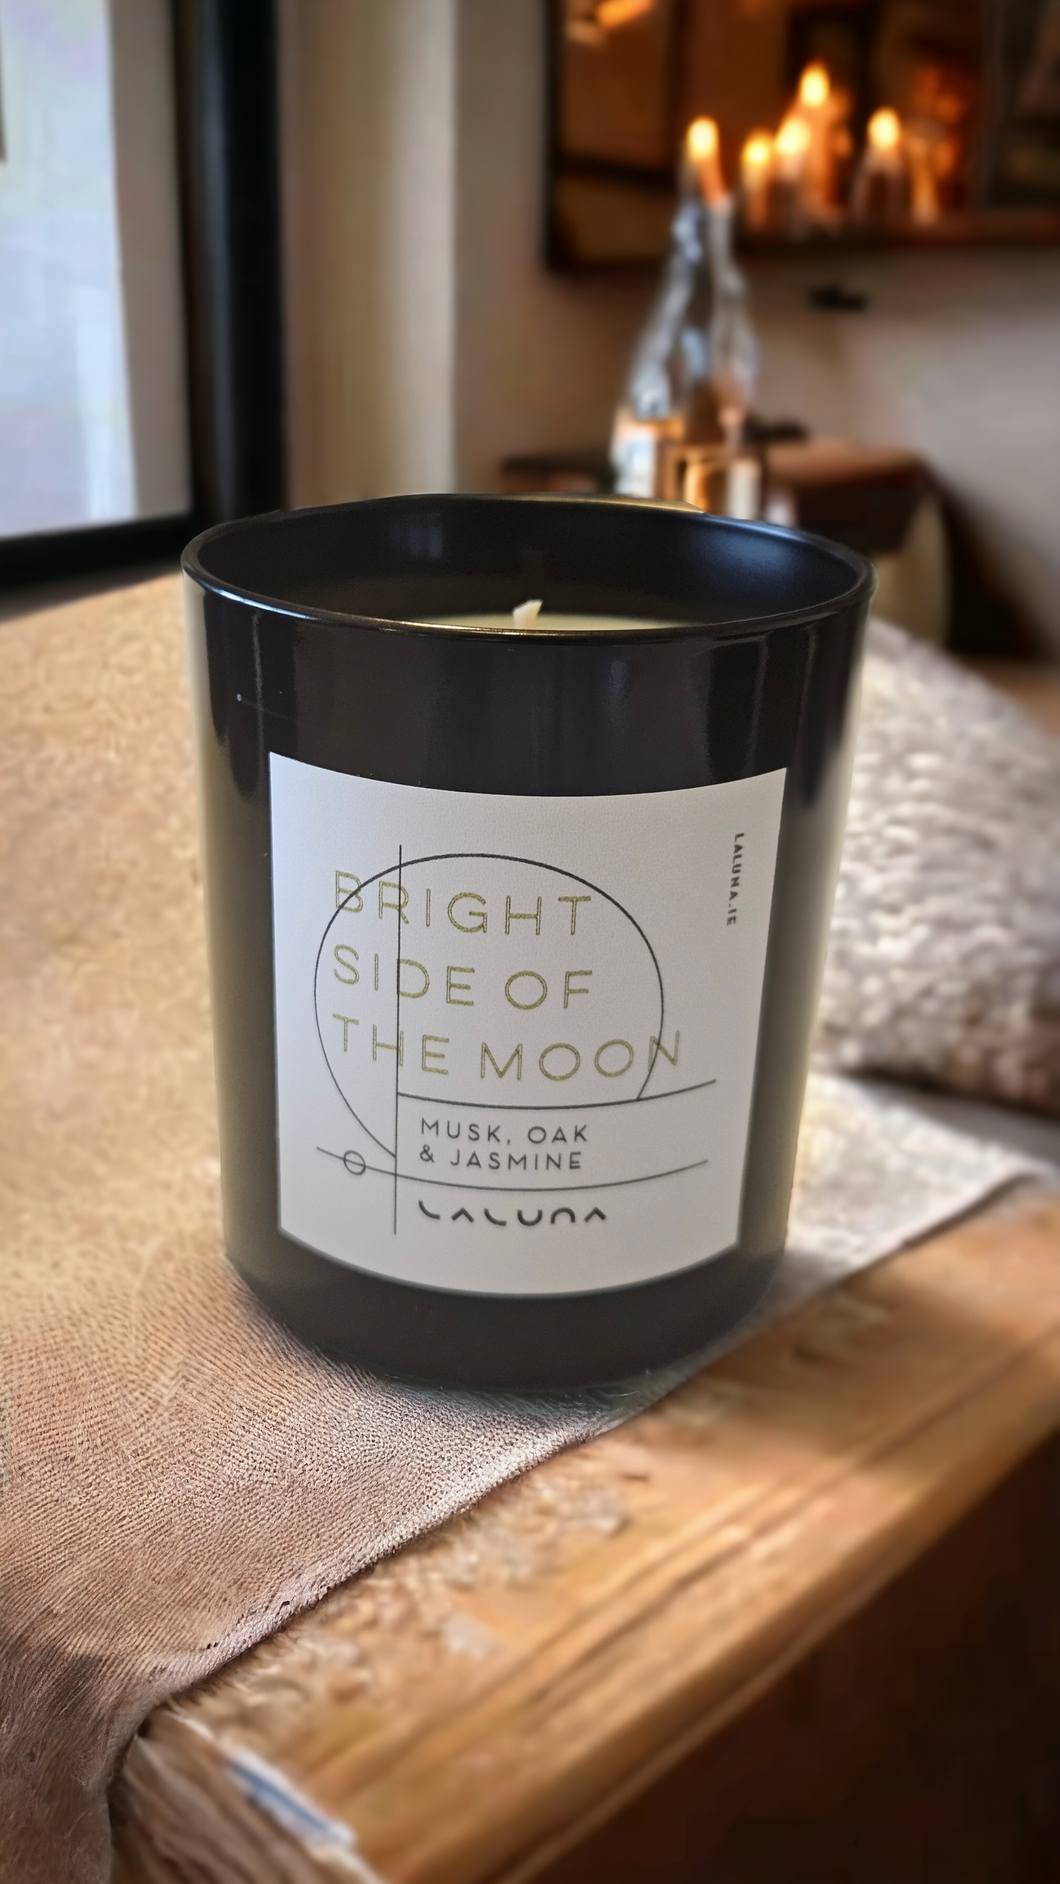 Bright side if the Moon - 30cl black gloss vessel.